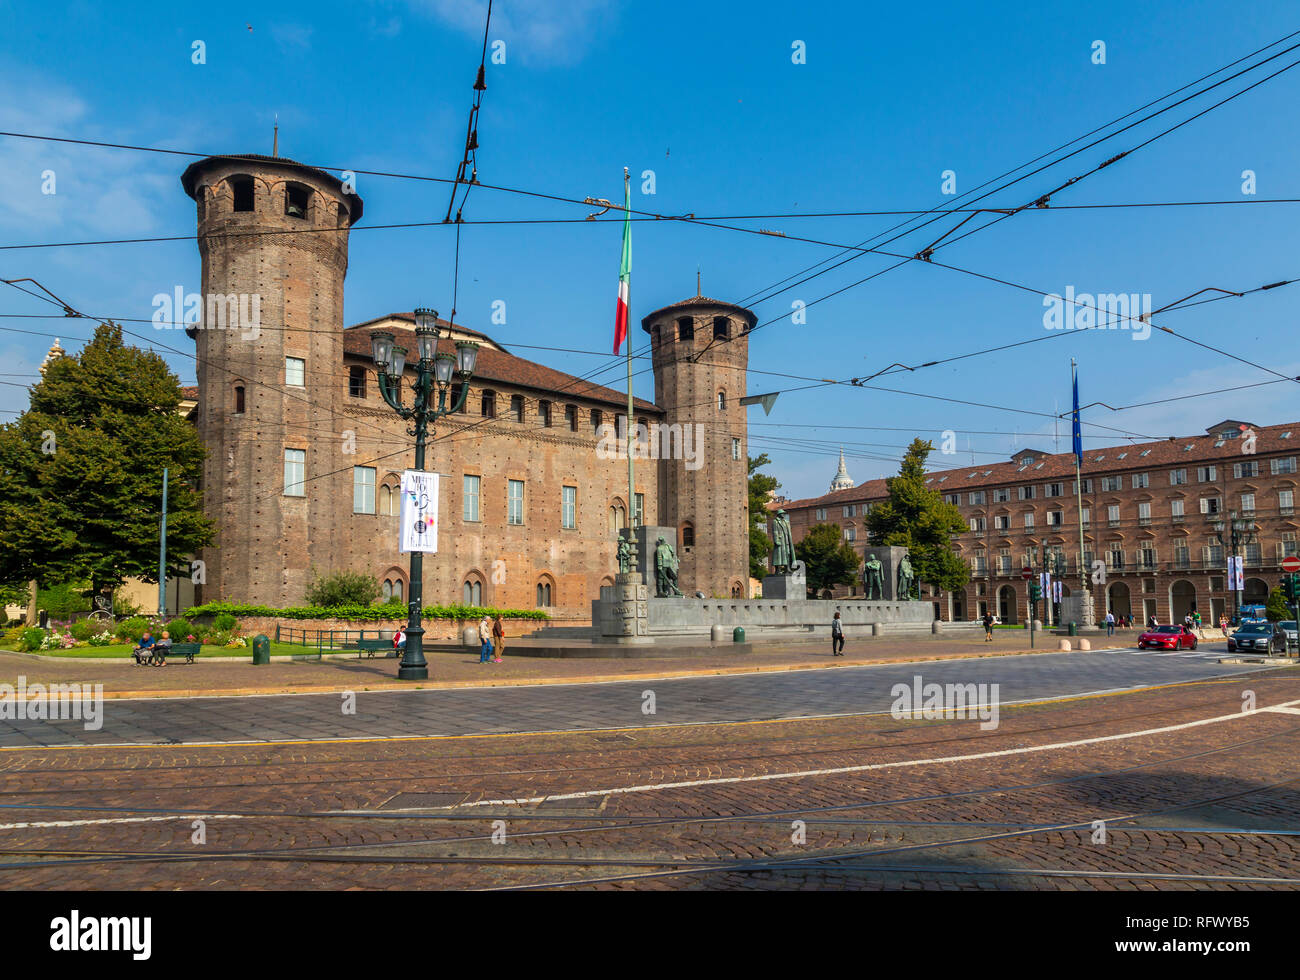 View of Castle in Piazza Castello, Turin, Piedmont, Italy, Europe Stock Photo